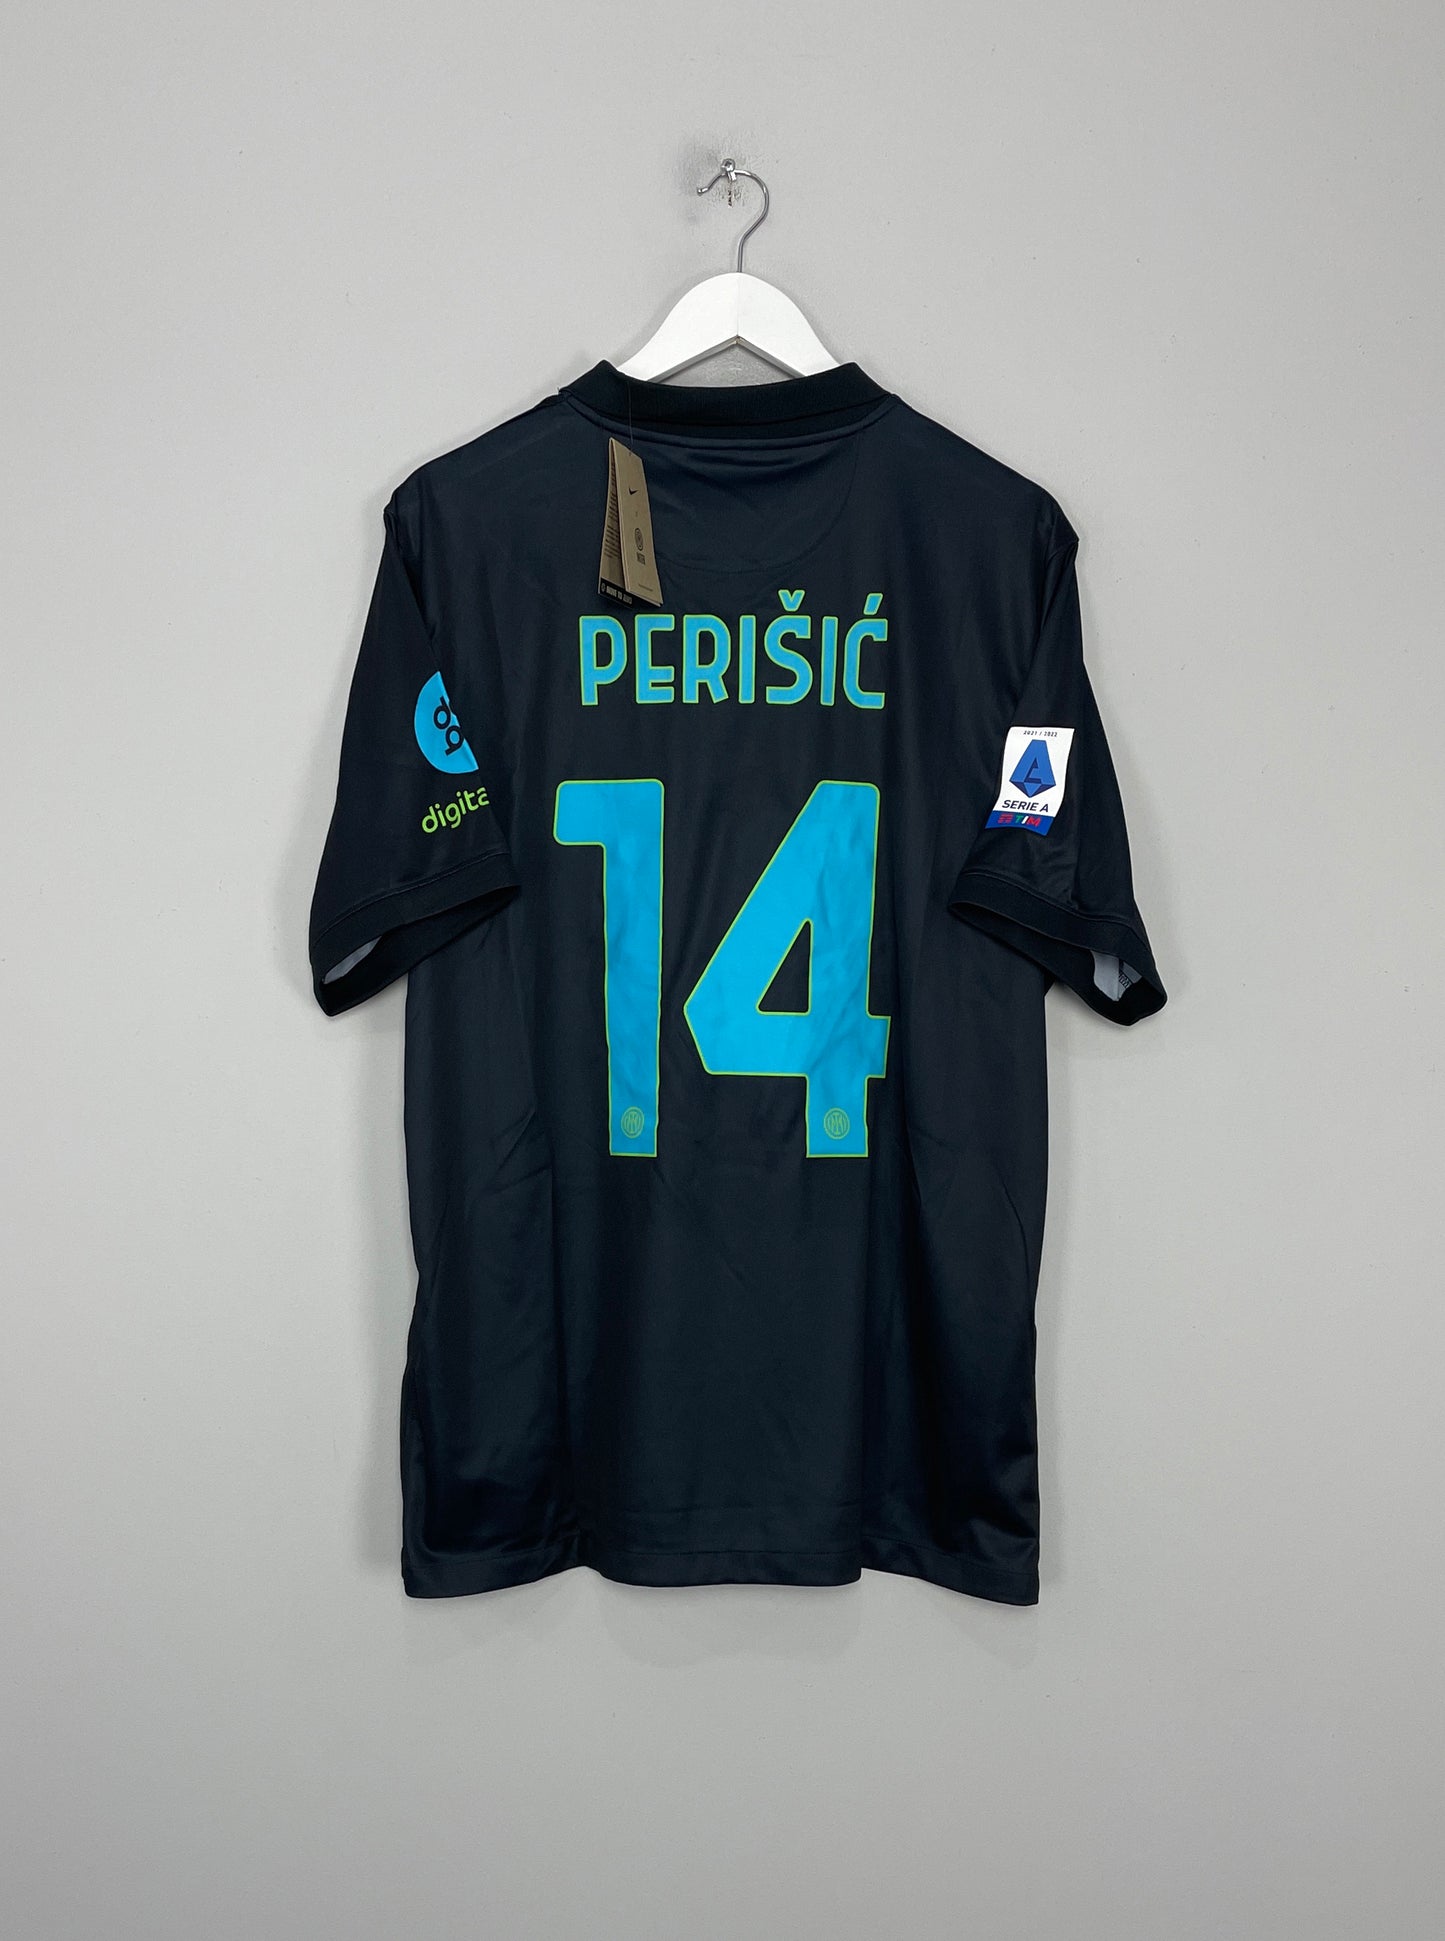 Image of the Inter Milan Perisic shirt from the 2021/22 season